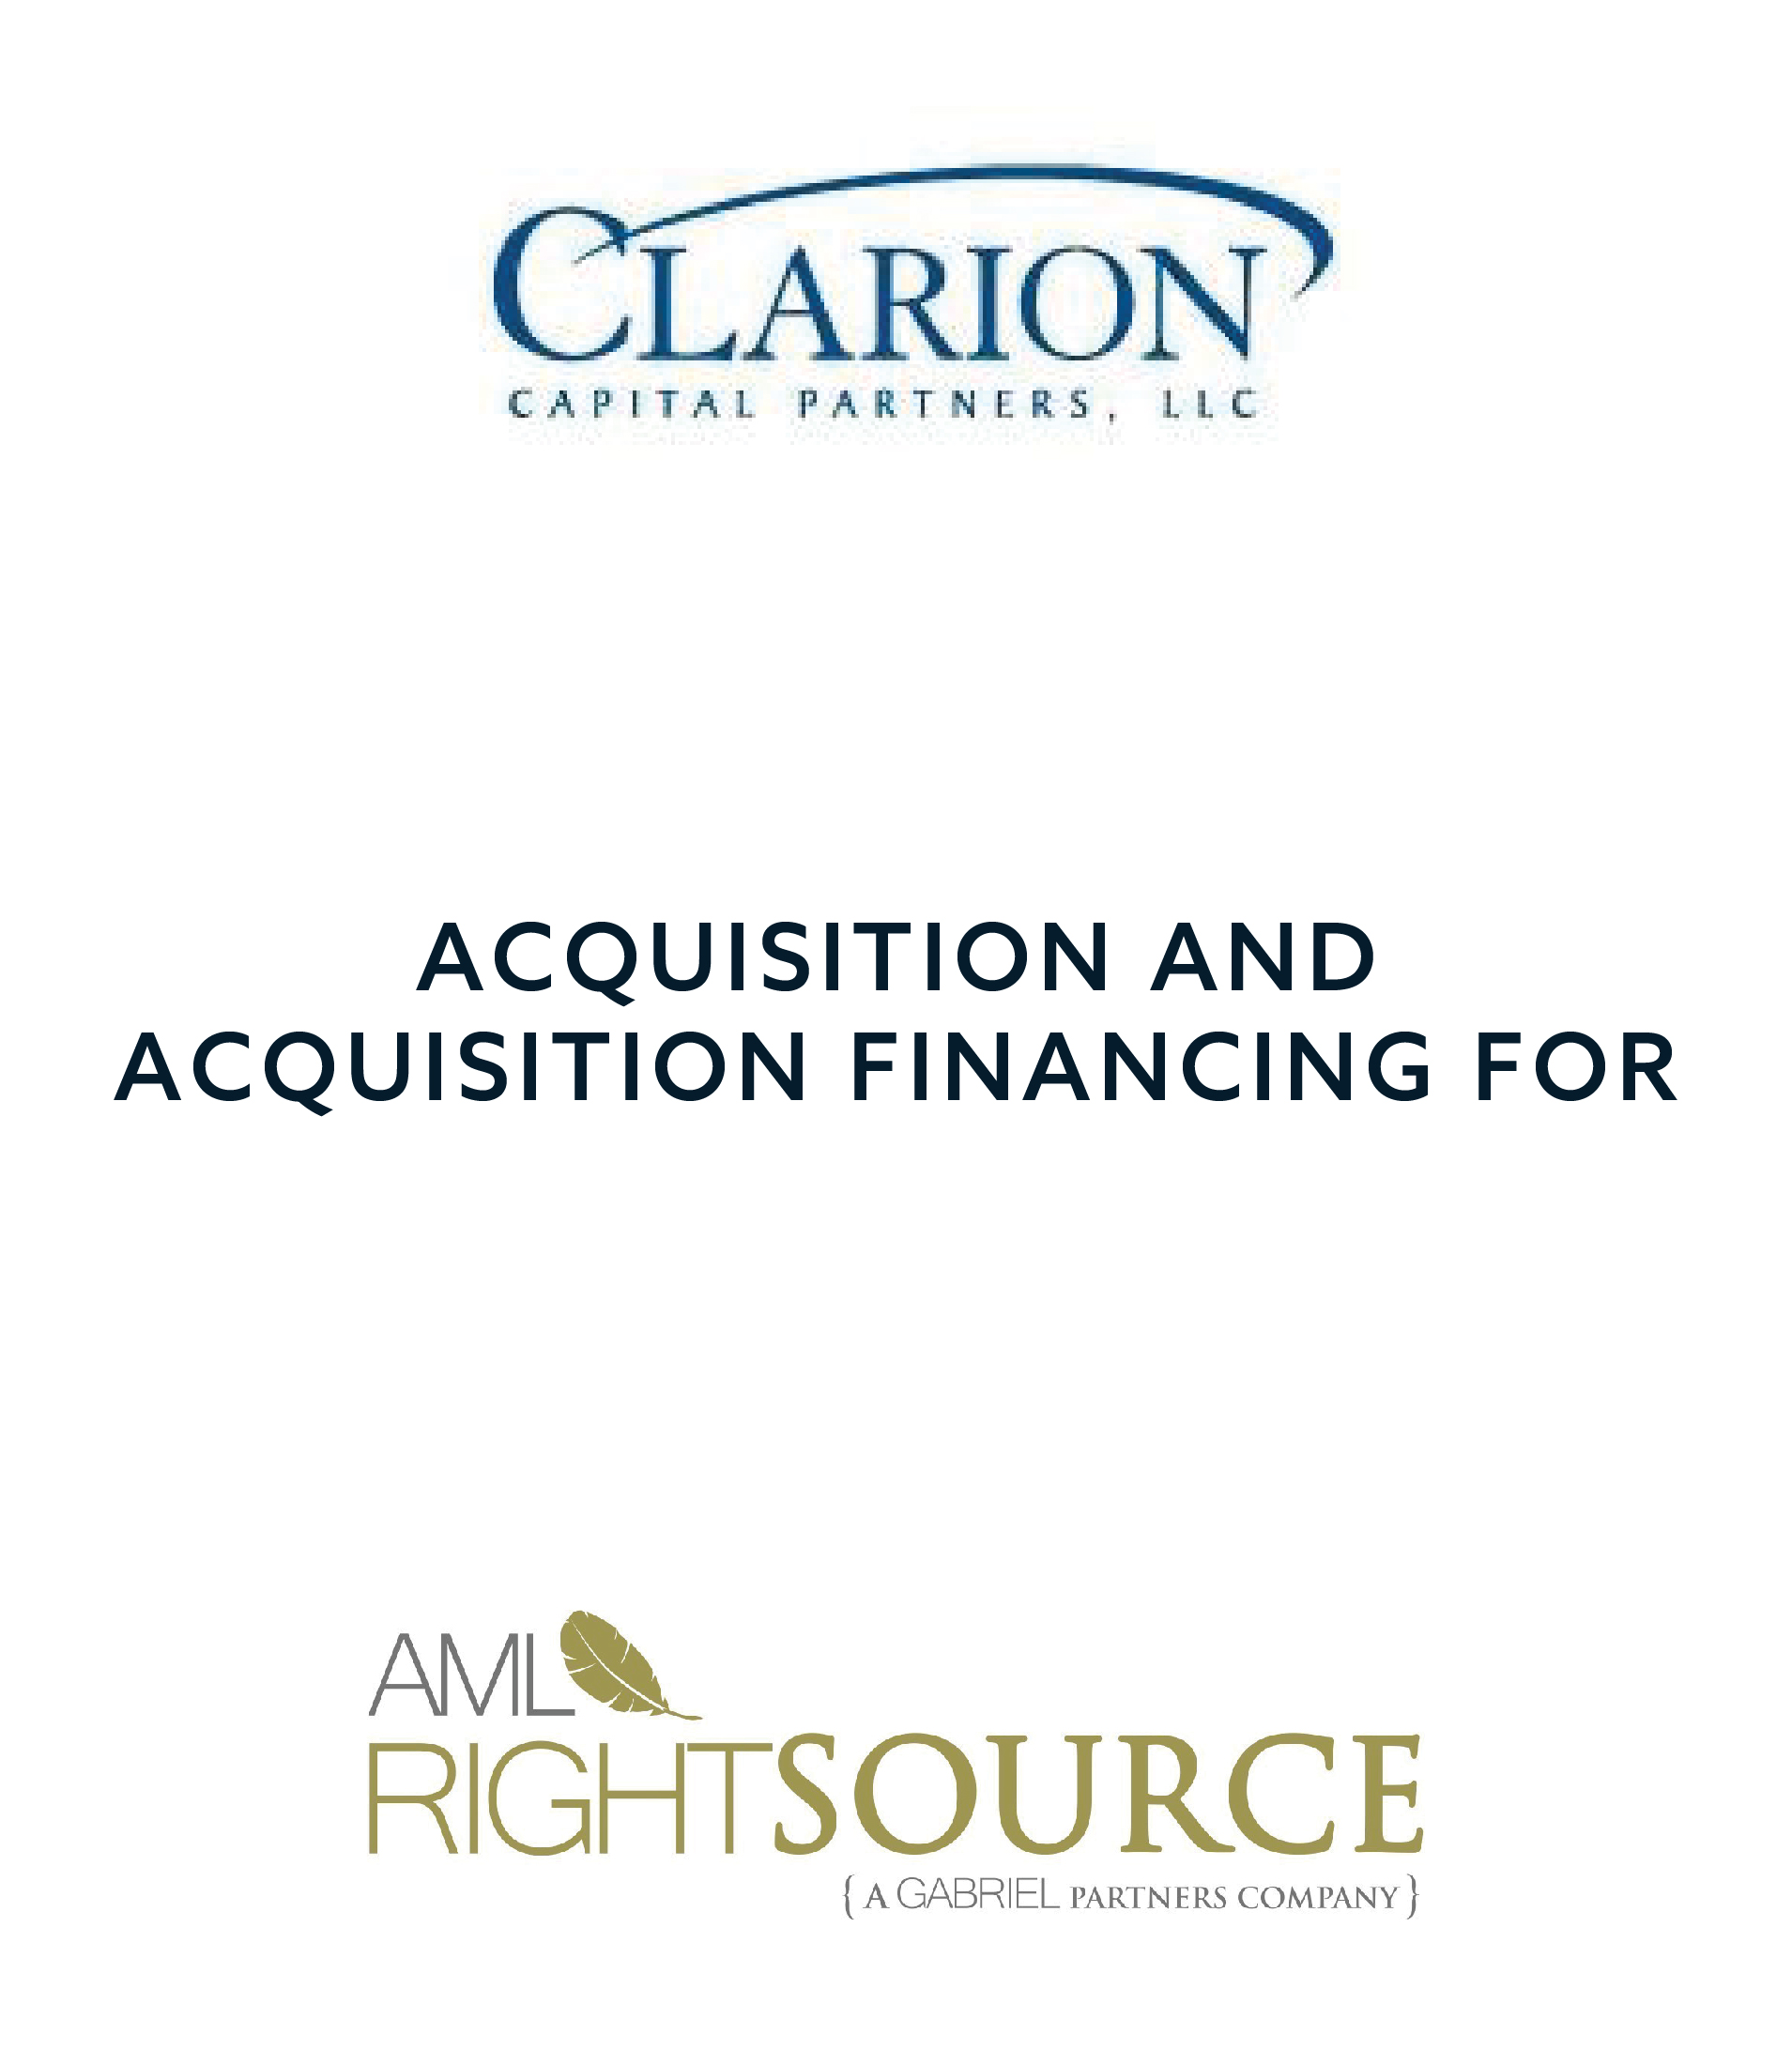 Clarion_AMLRightSource_008987.0005